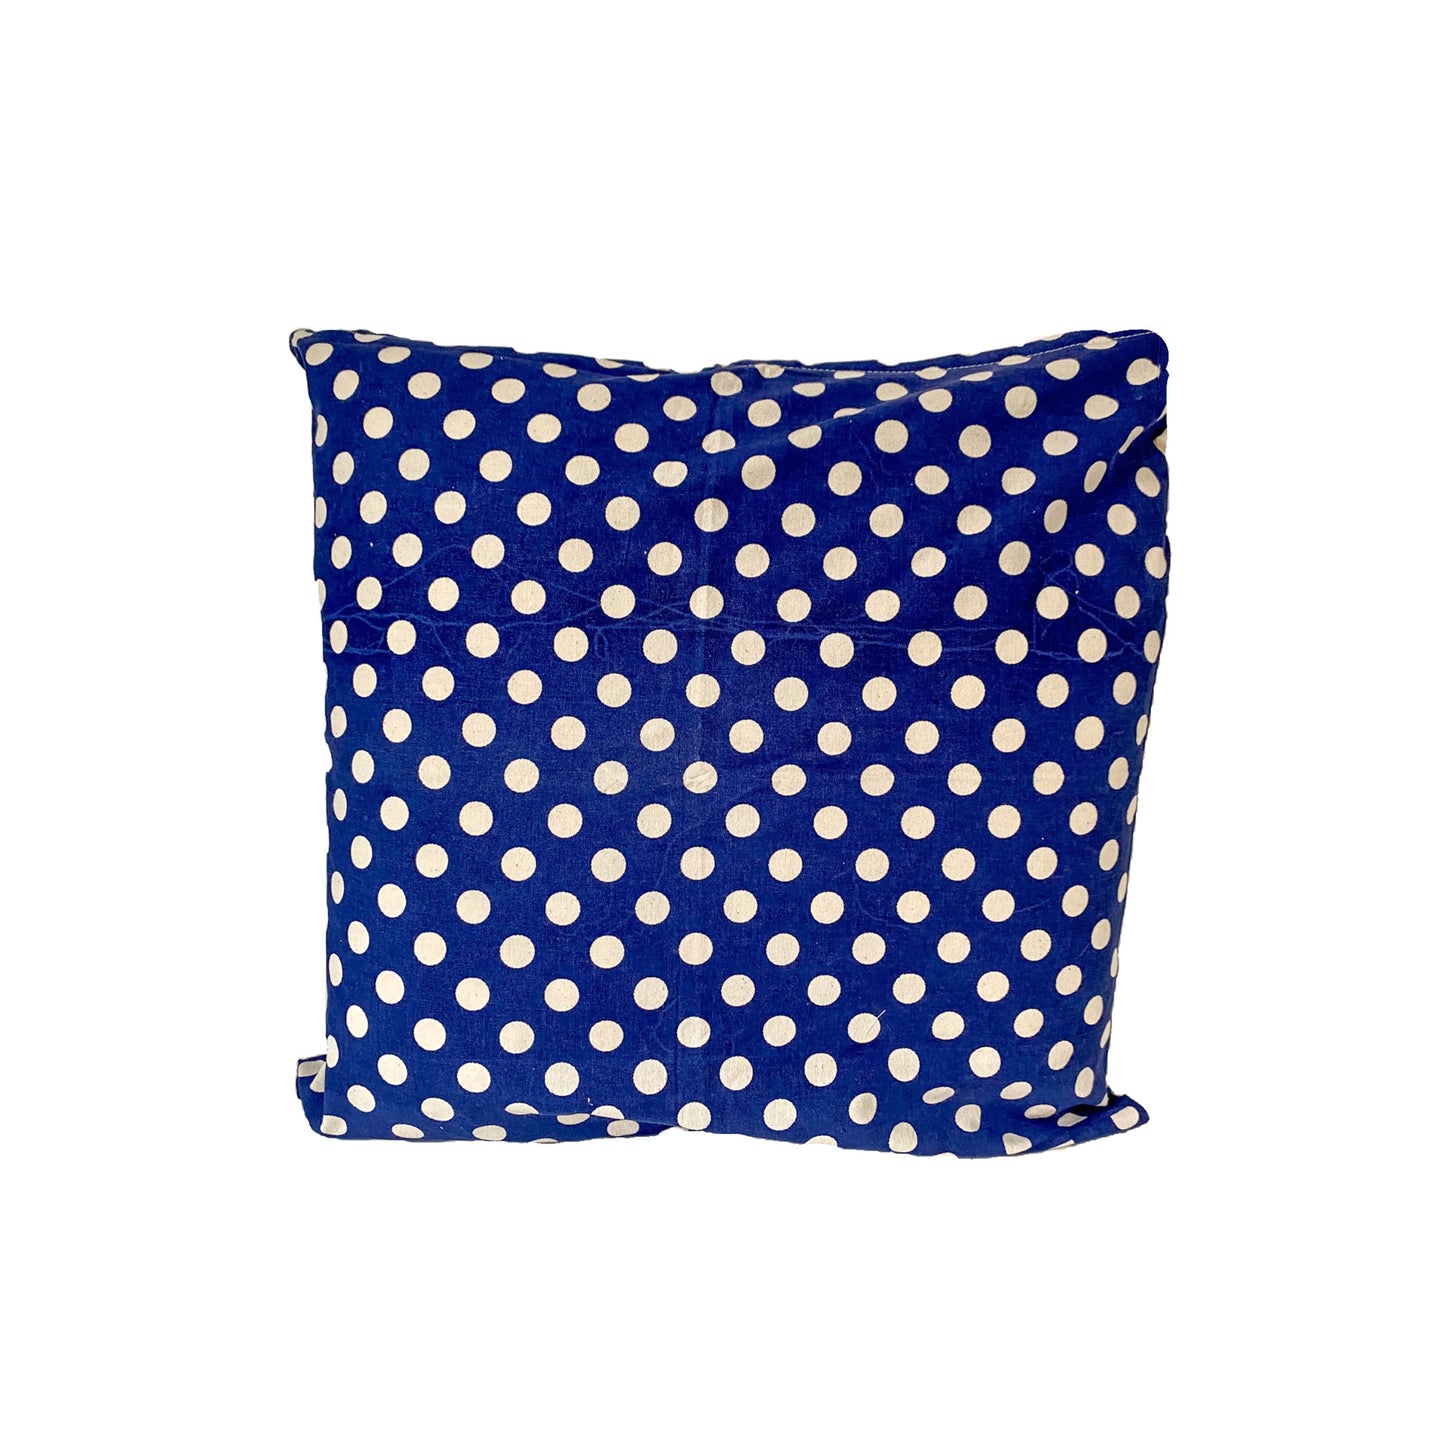 Stella Decor cushion cover design polka dots in size 50x50 cm in color navy blue